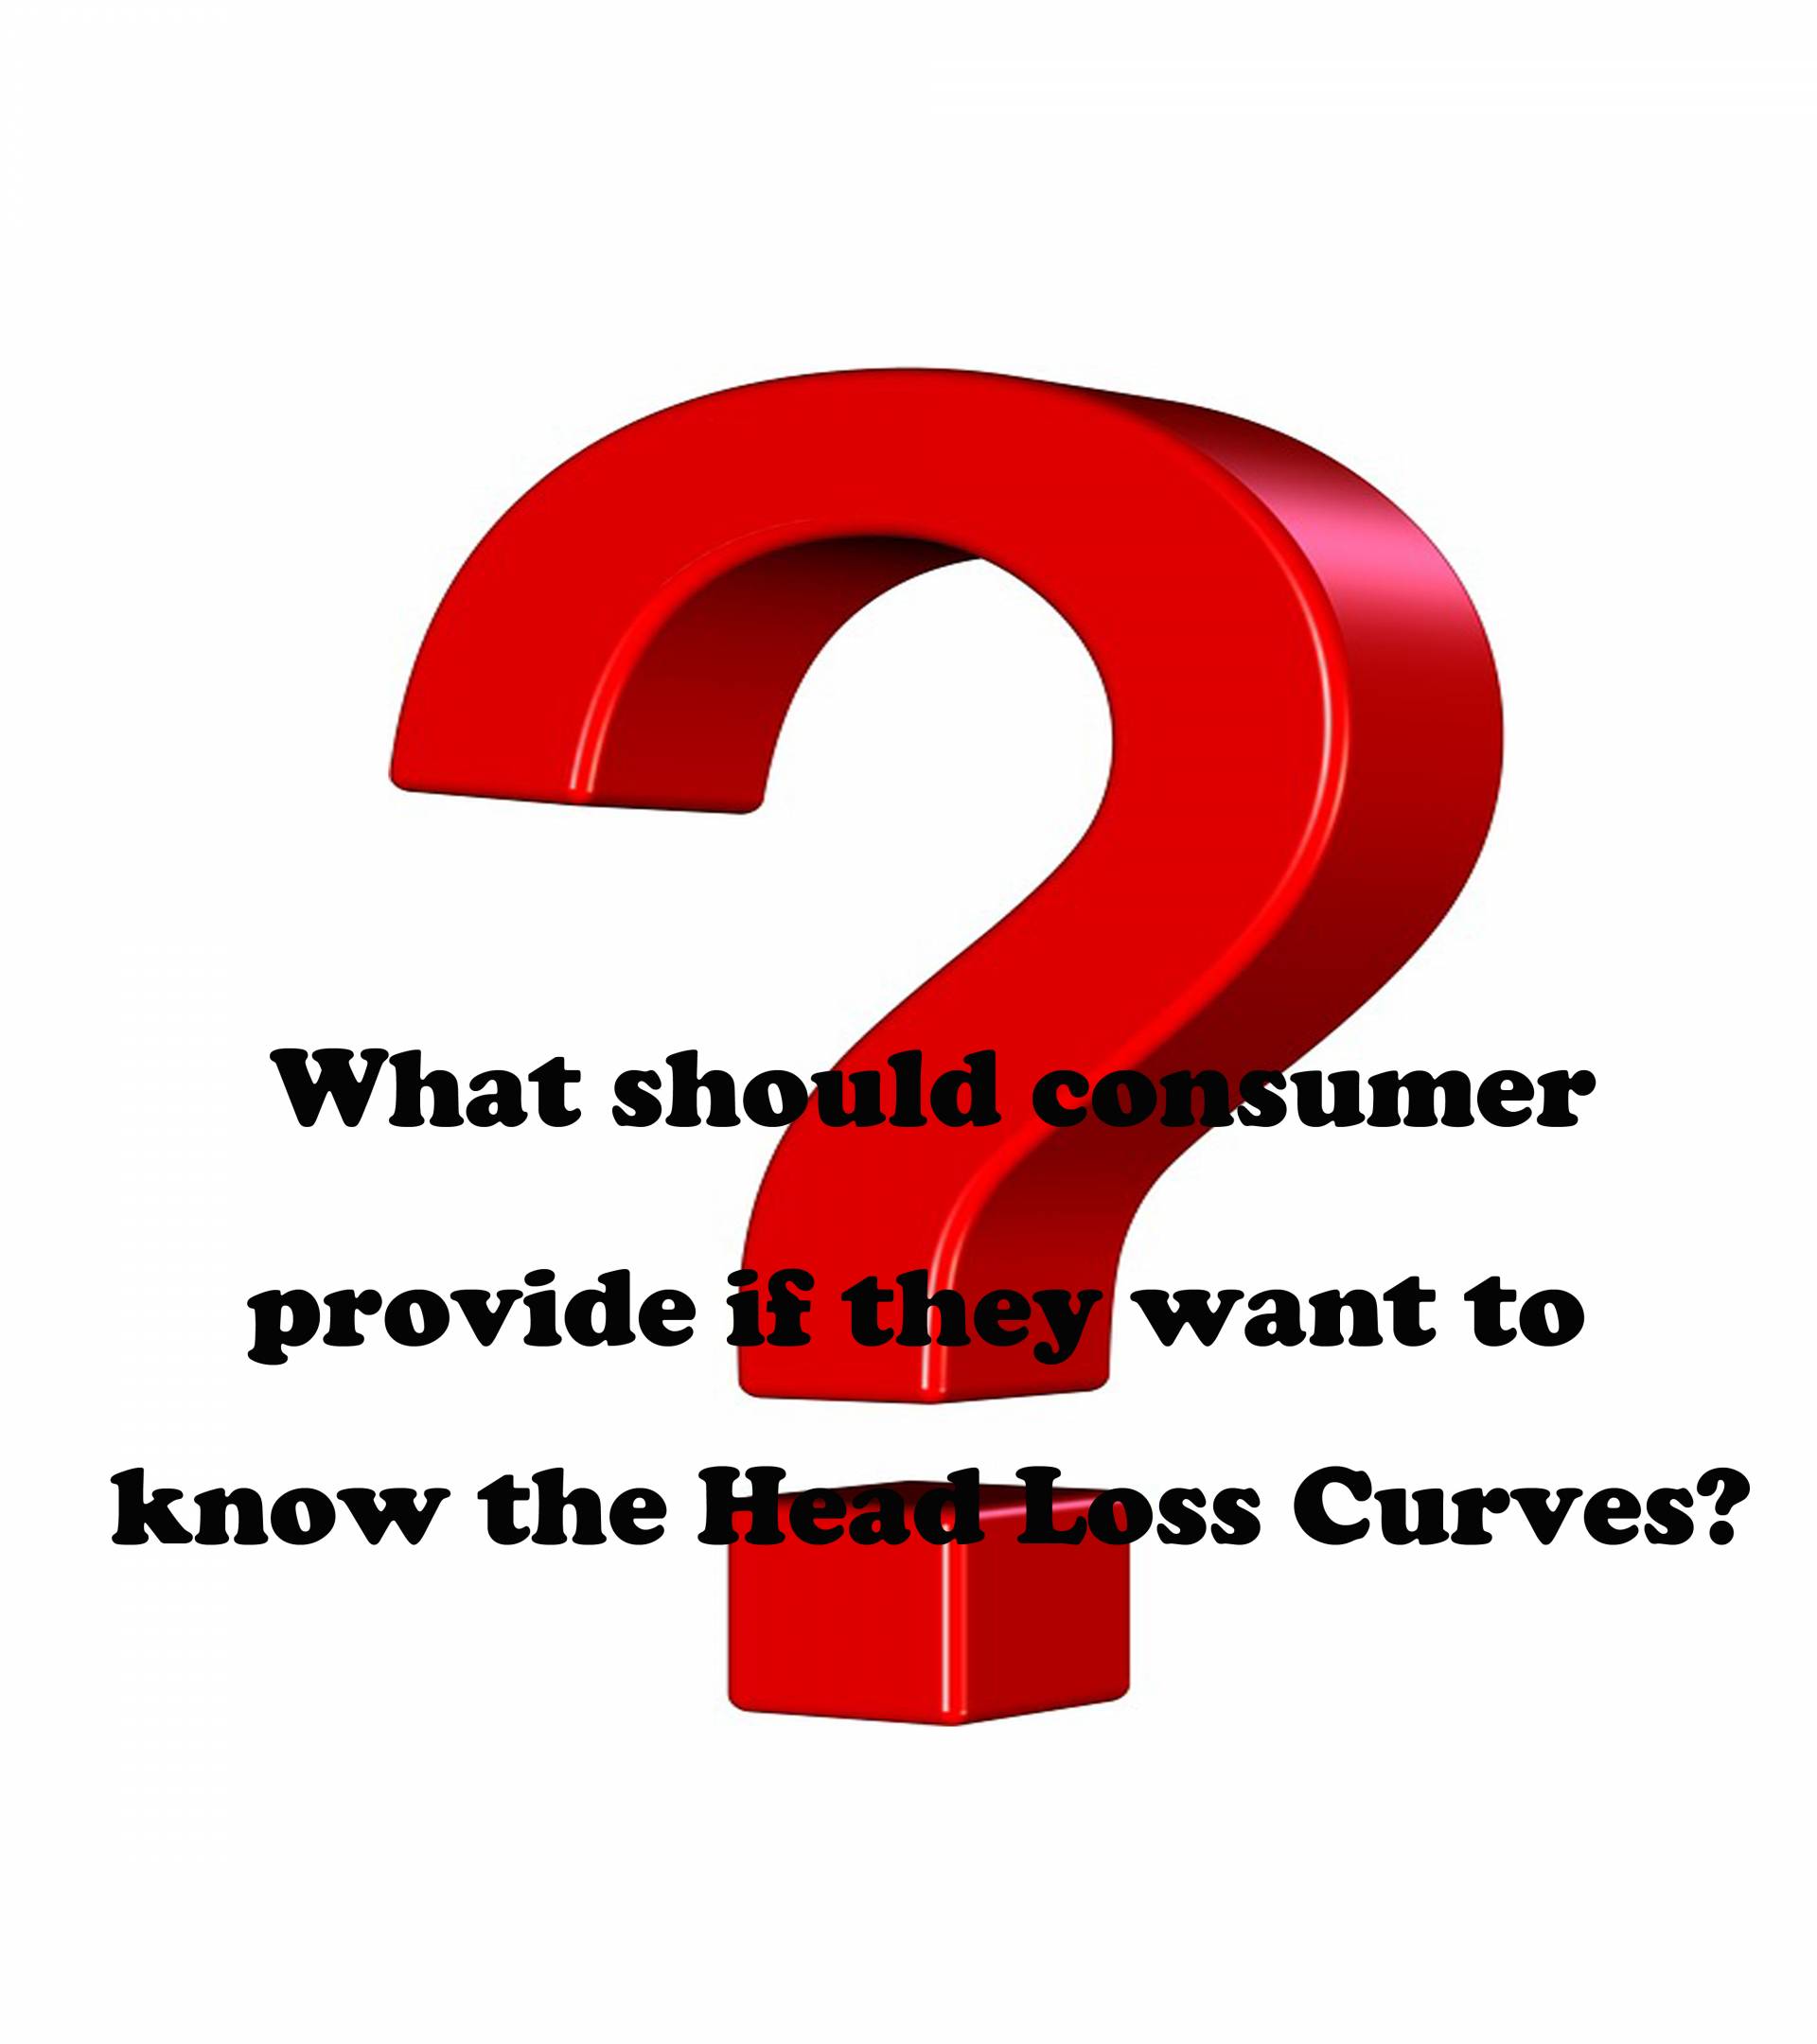 What should consumer provide if they want to know the Head Loss Curves?